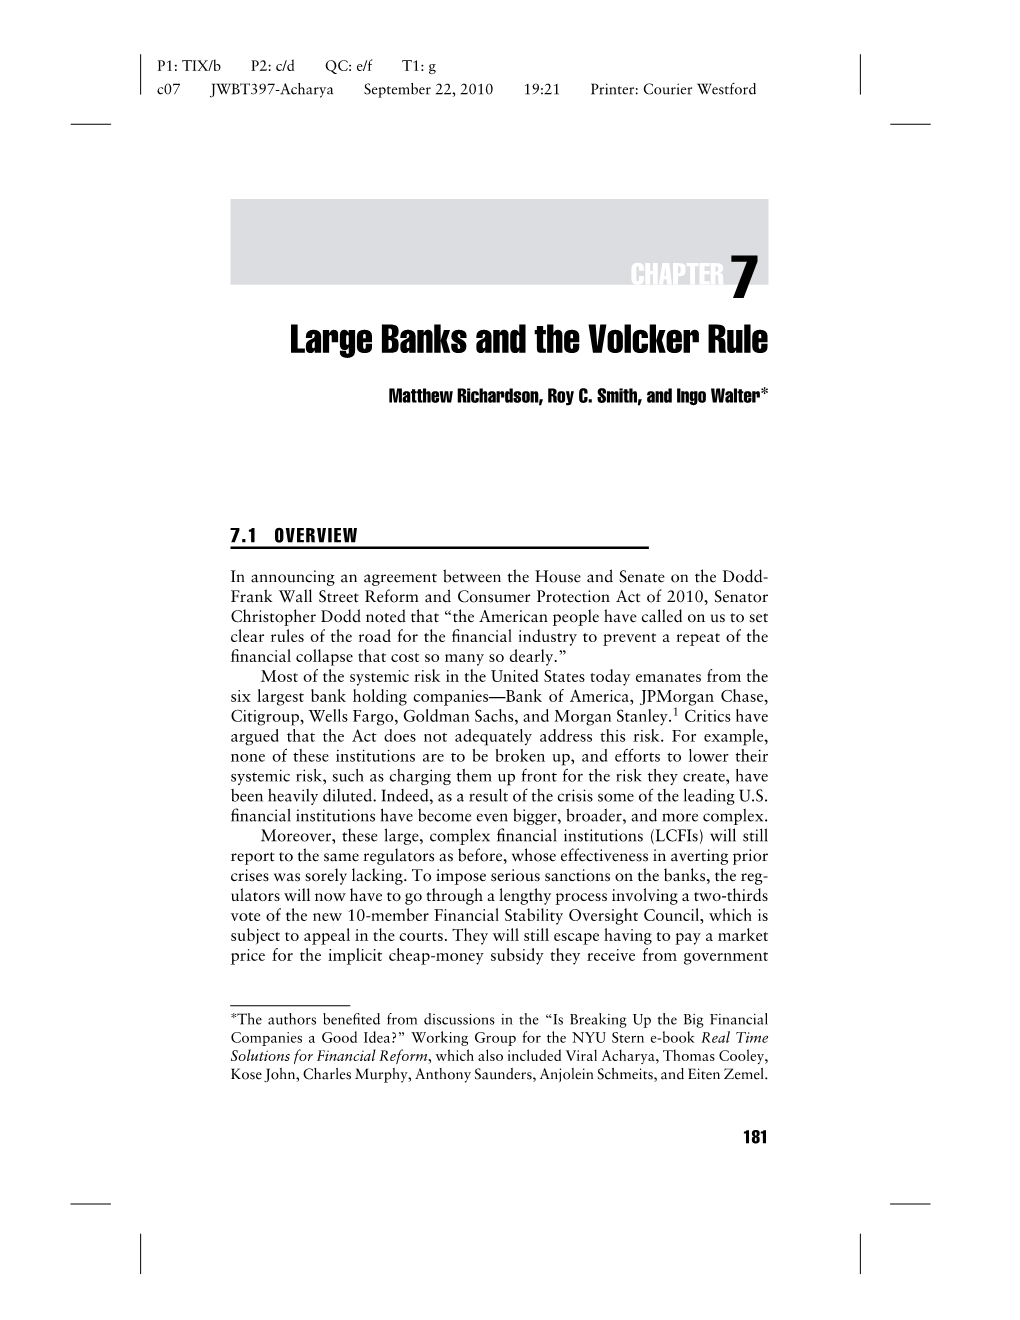 Large Banks and the Volcker Rule